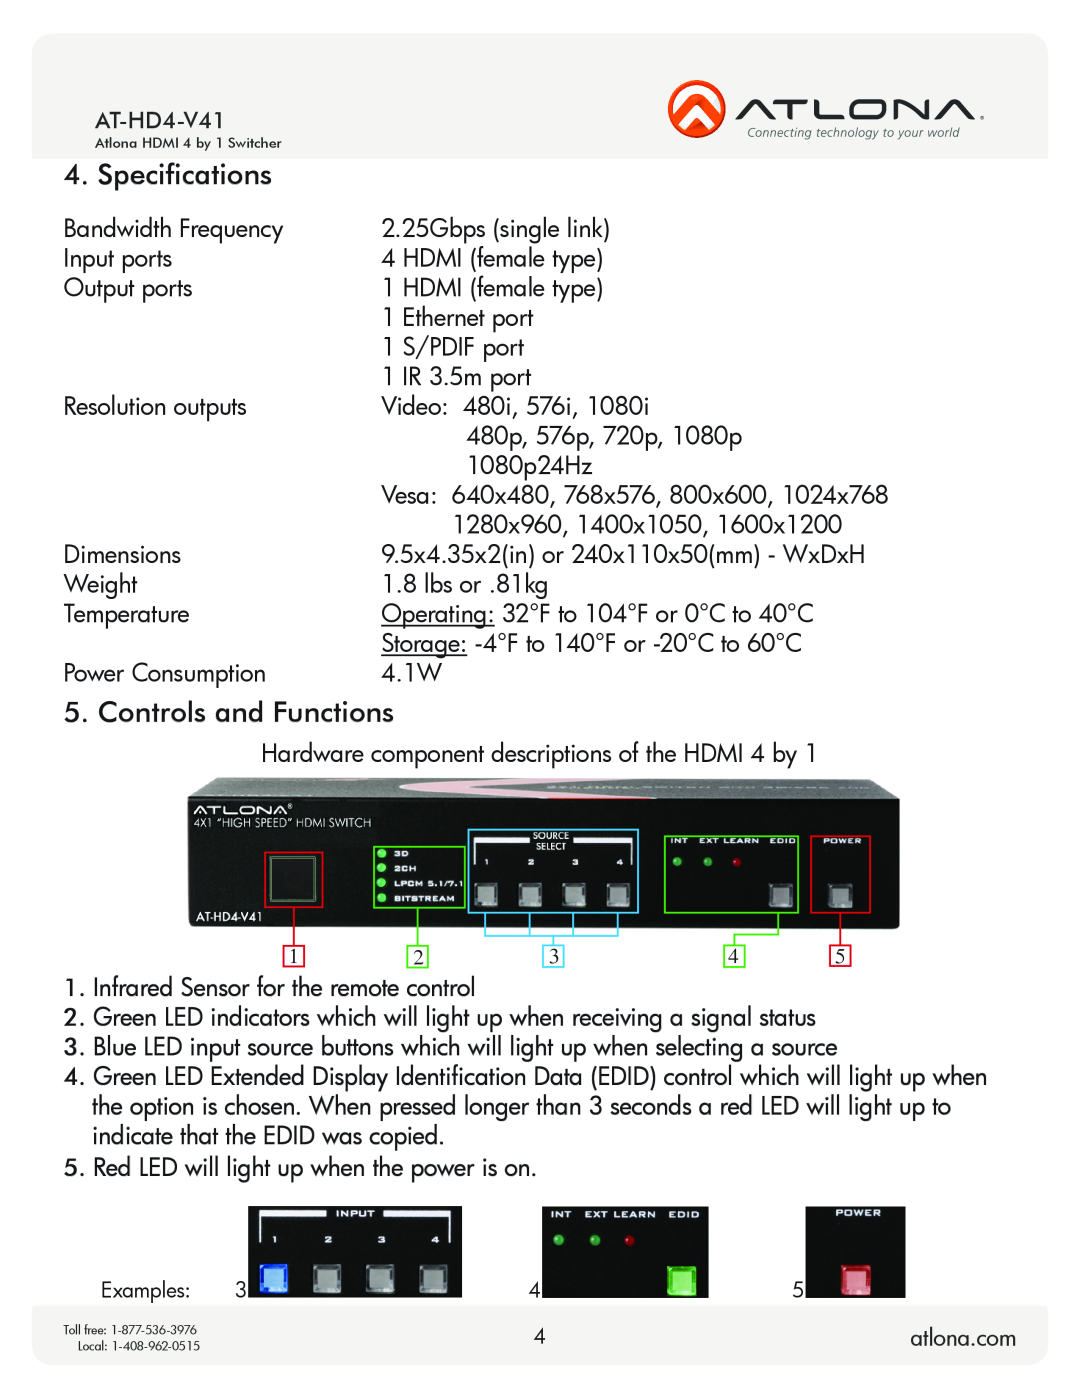 Atlona AT-HD4-V41 user manual Specifications, Controls and Functions, Vesa 640x480, 768x576, 800x600 